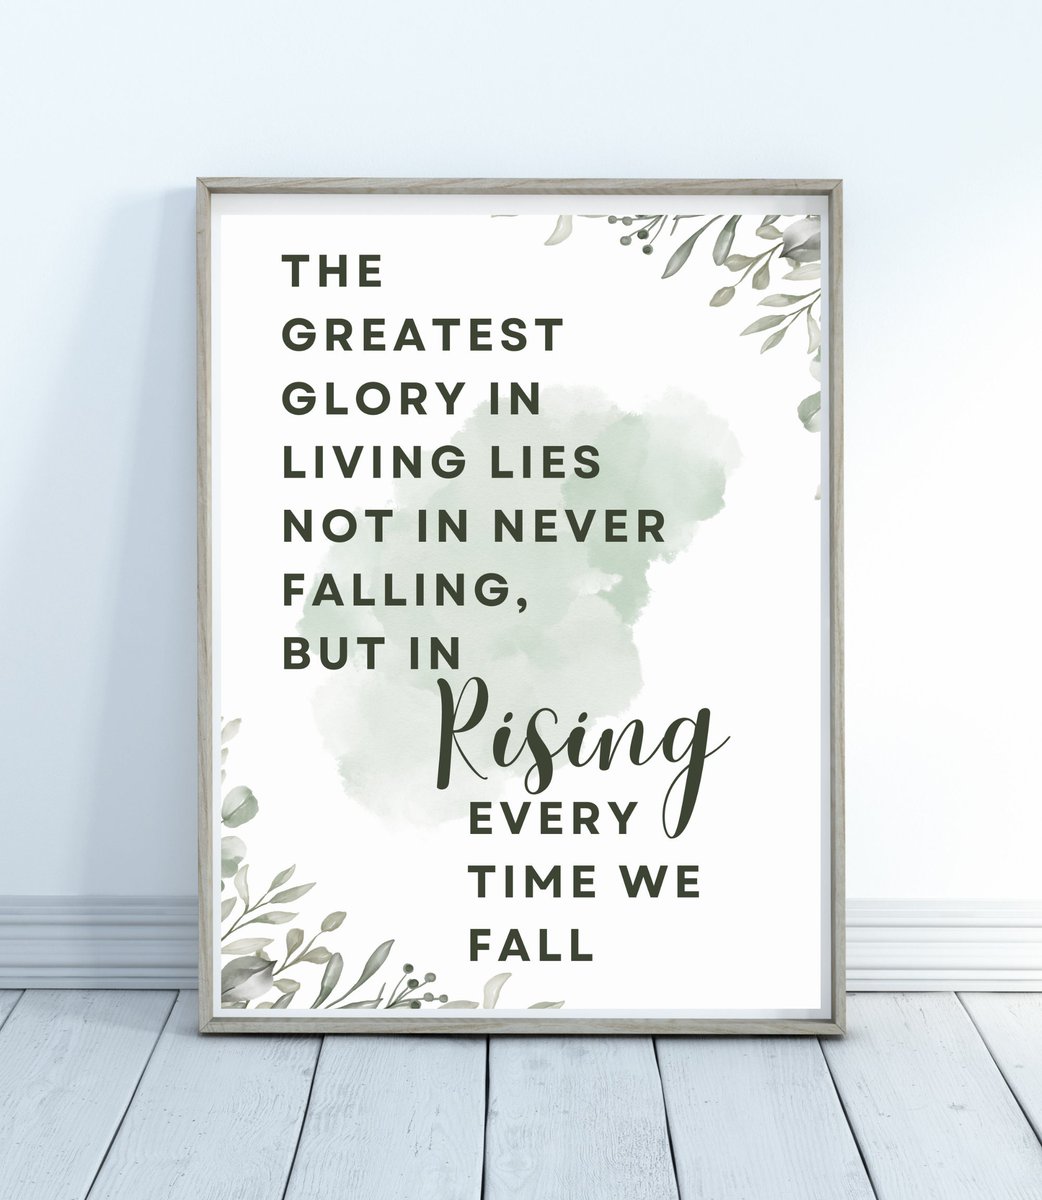 Excited to share the latest addition to my #etsy shop: Rising Every Time We Fall Motivational Poster etsy.me/41xBclZ #motivationalposter #inspirationalposter #bedroom #livingroom #office #digitalart #digitalposter #poster #risingabove